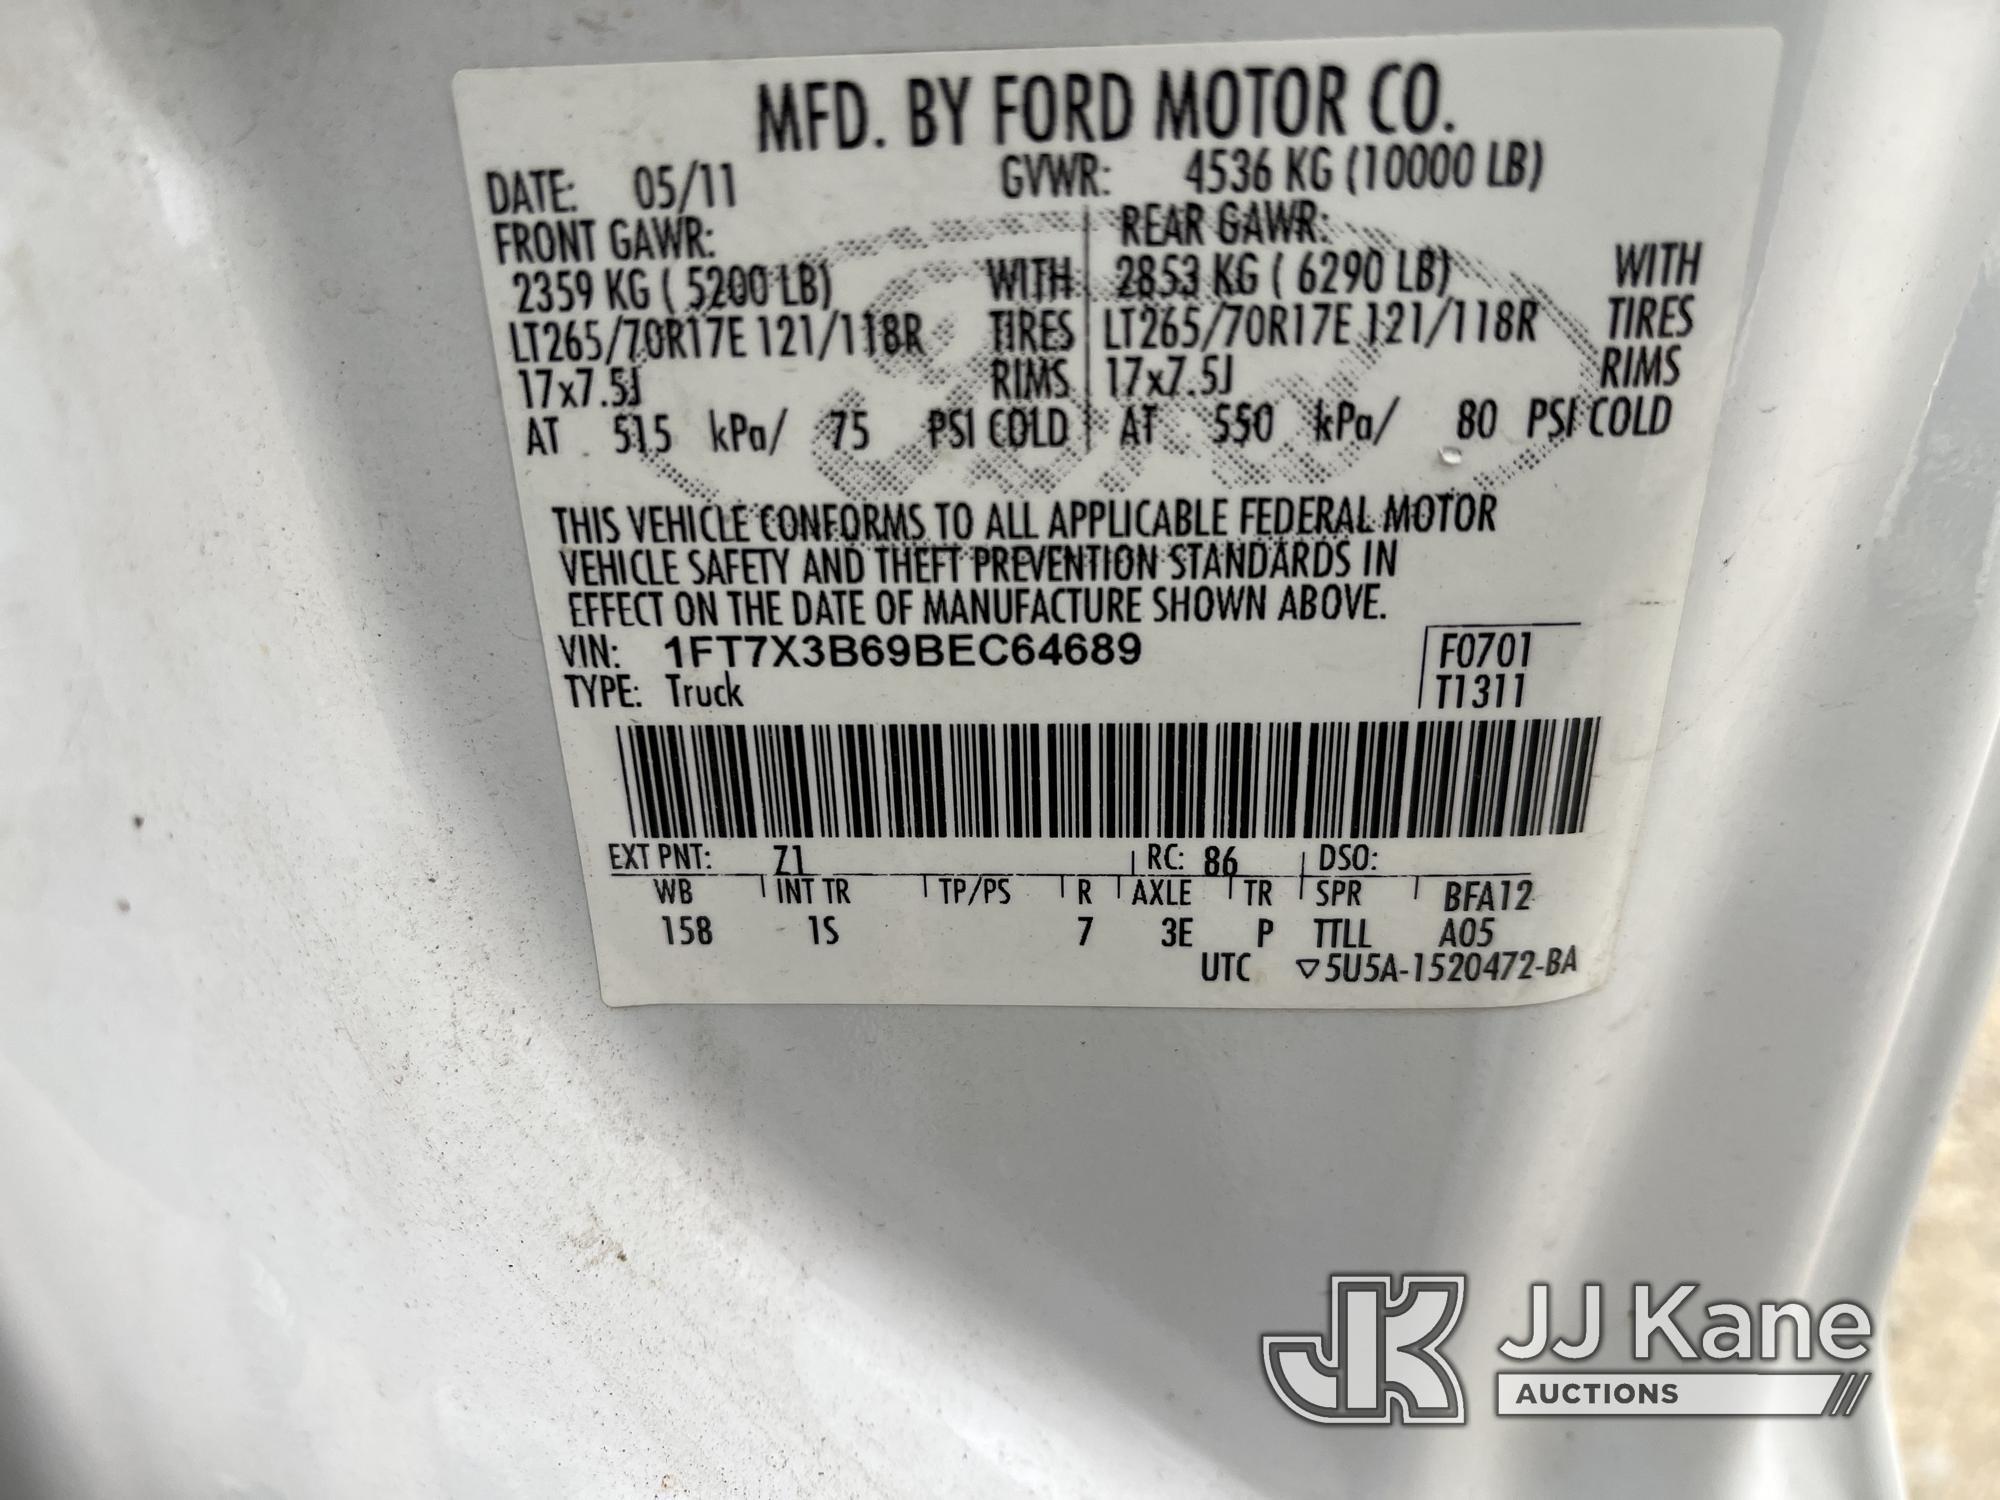 (Smock, PA) 2011 Ford F350 4x4 Extended-Cab Service Truck Runs & Moves) (Jump To Start, Rust & Body